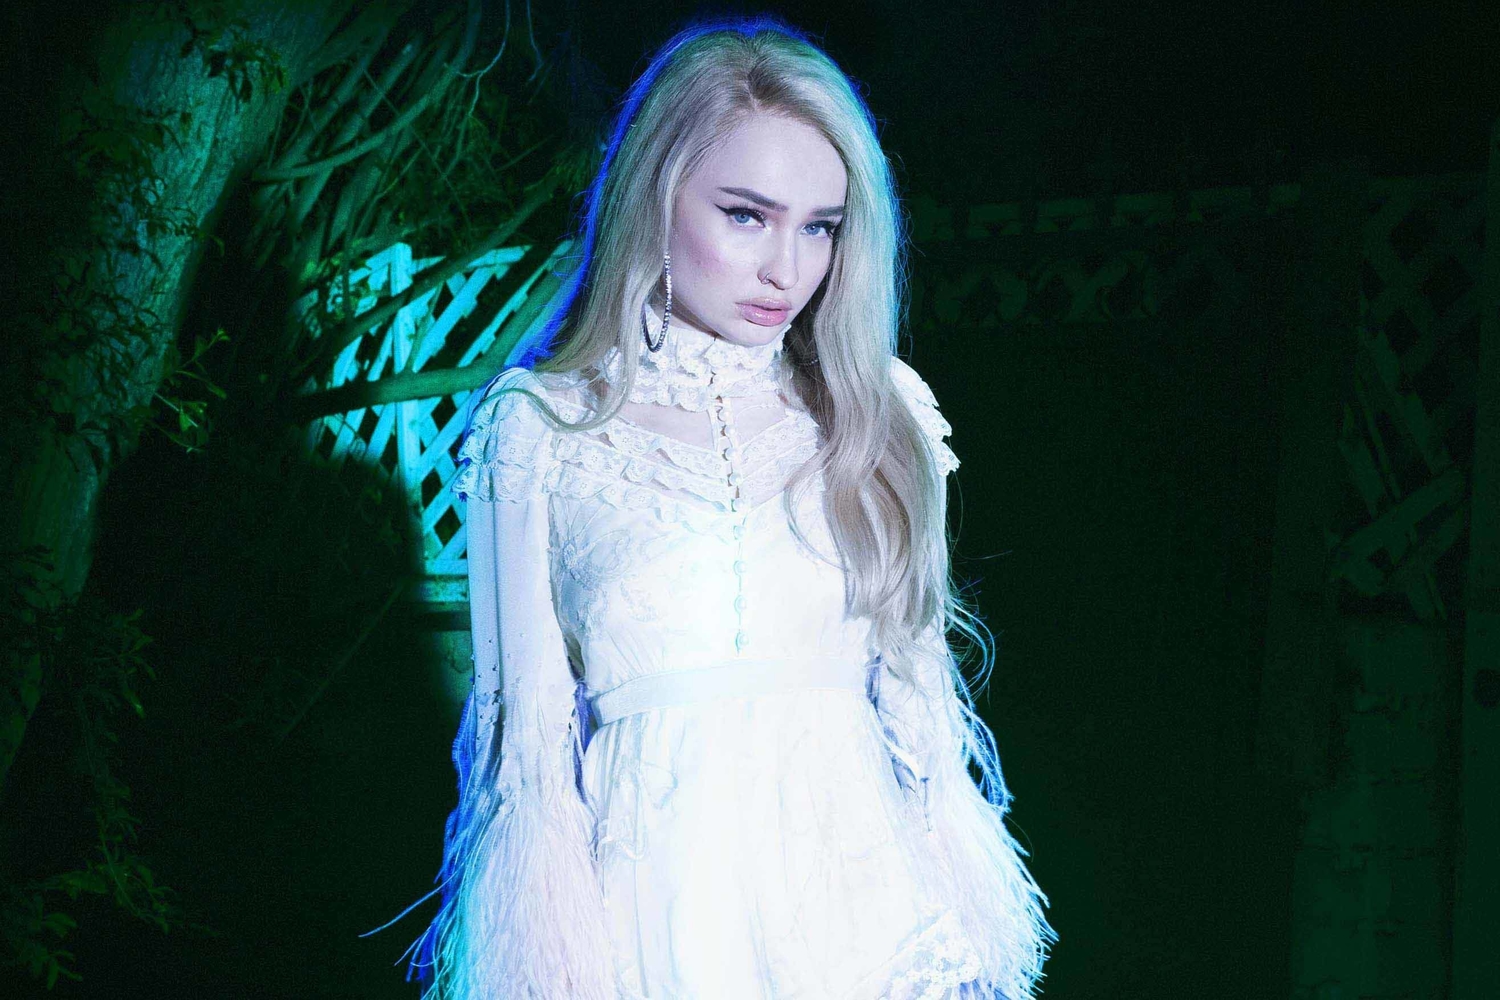 The Bitch With The Sauce: Kim Petras